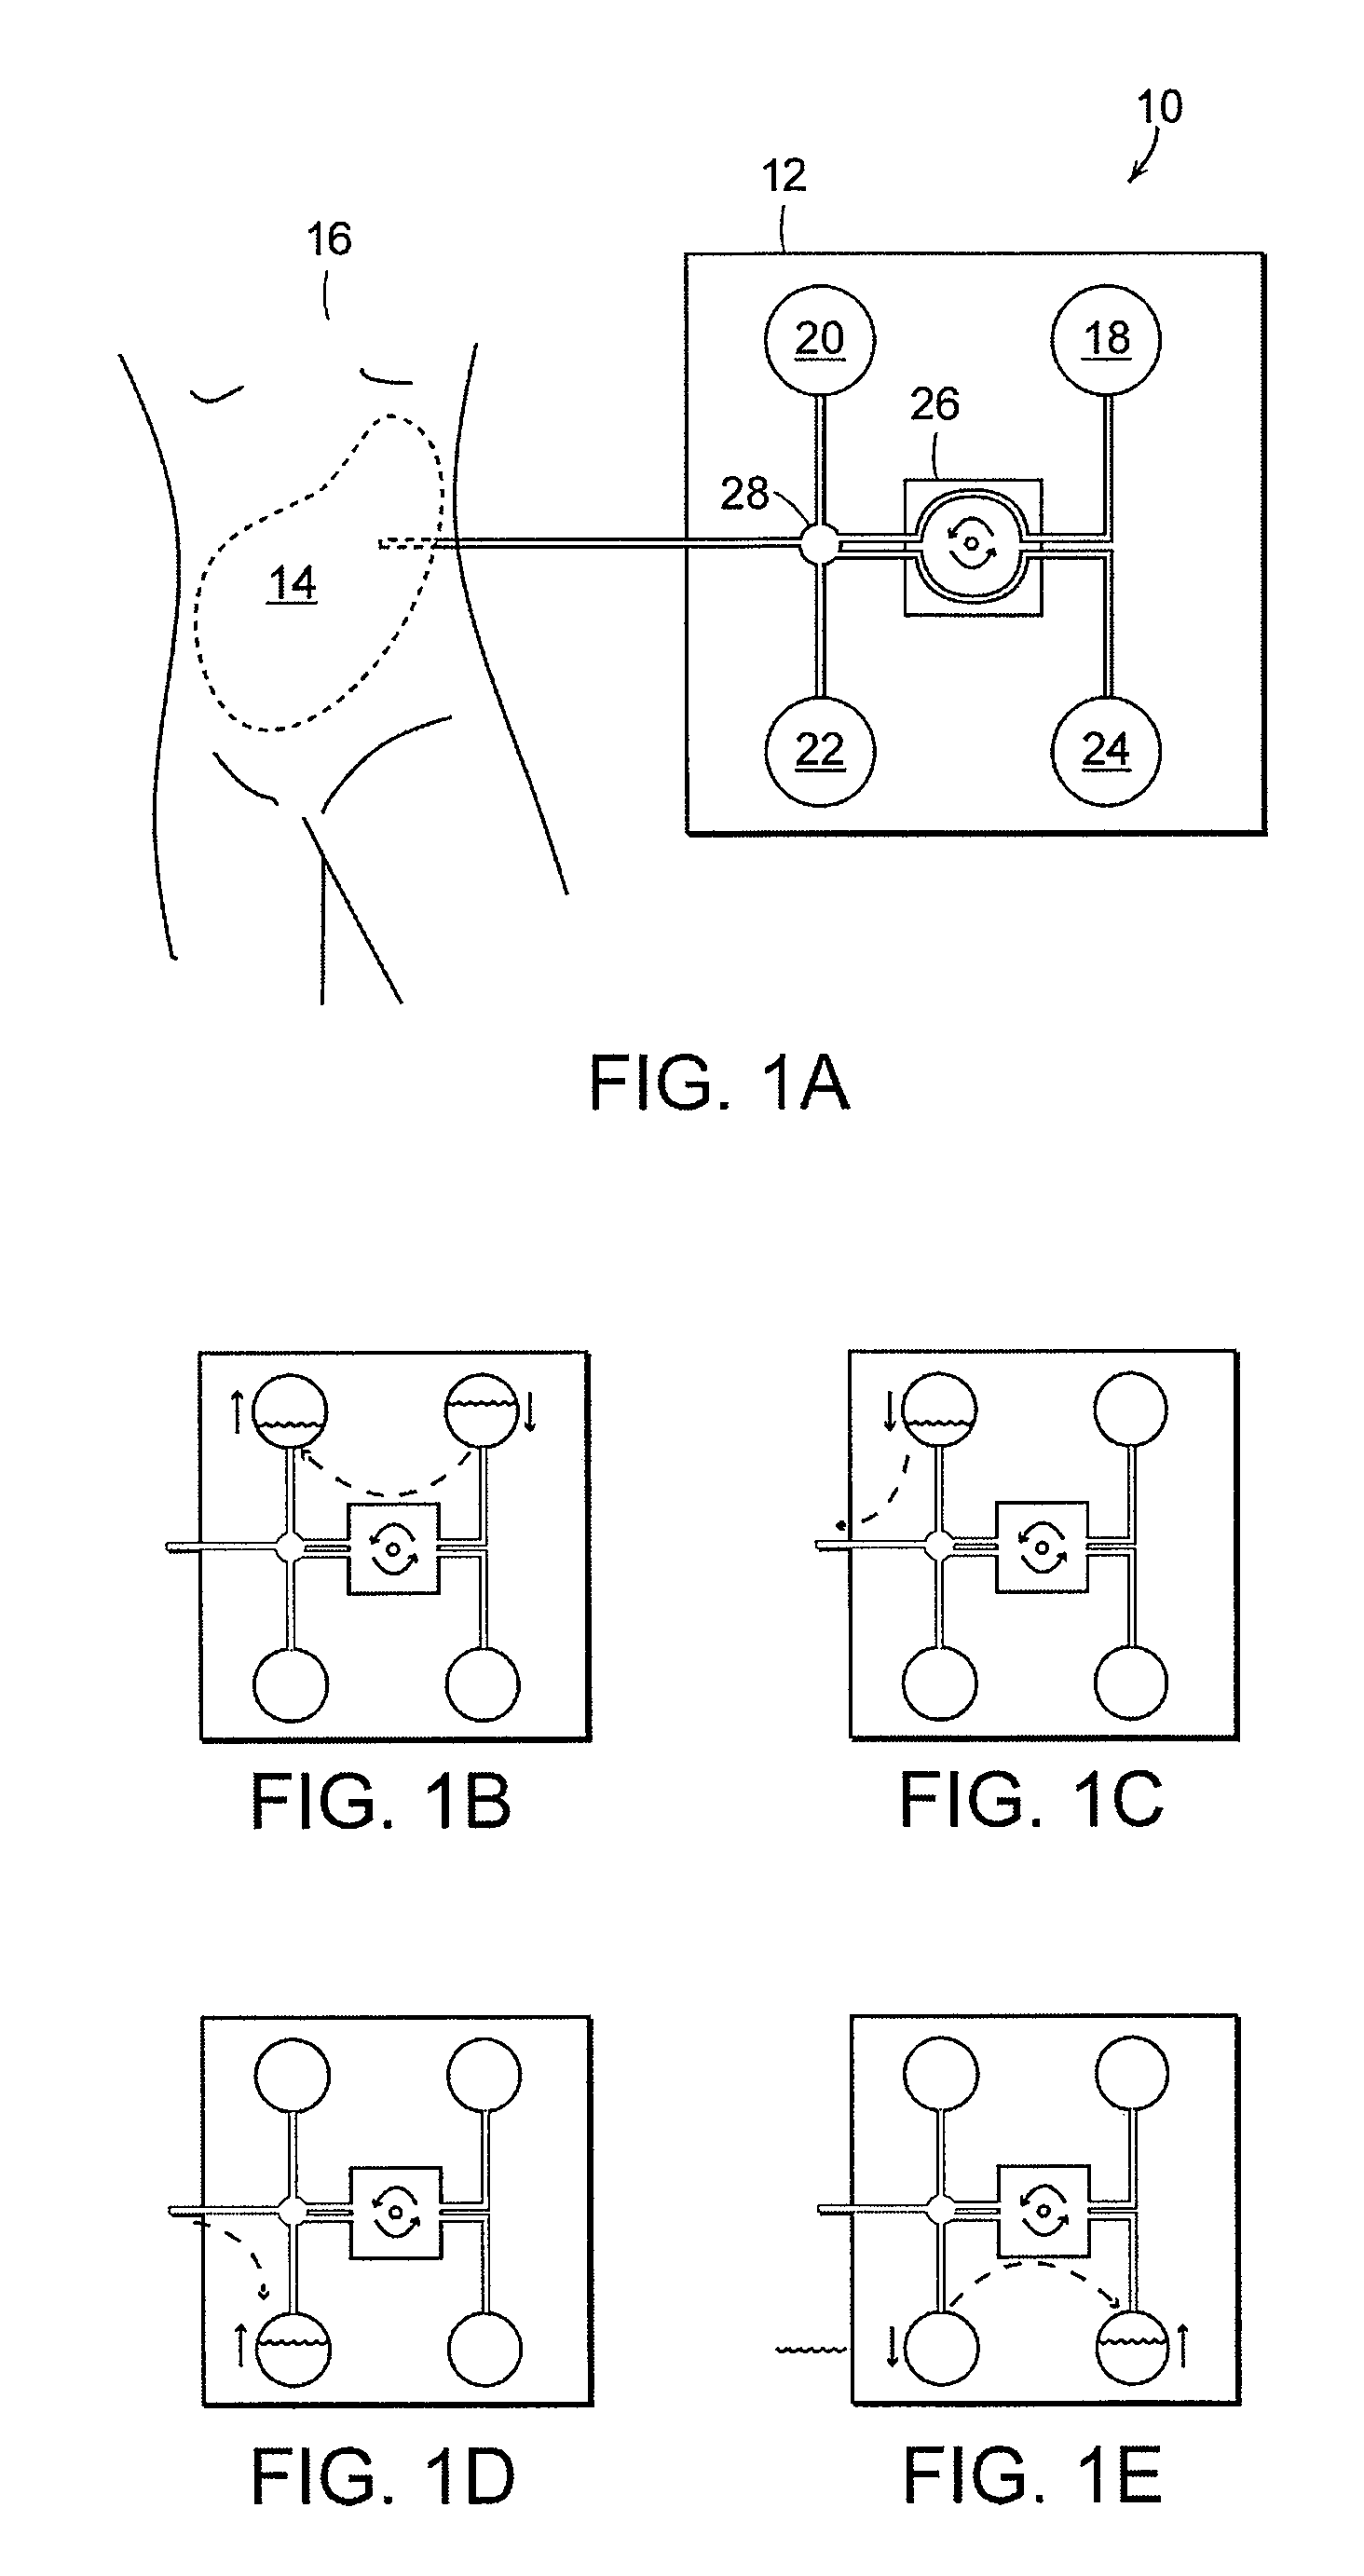 Early stage peritonitis detection apparatus and methods